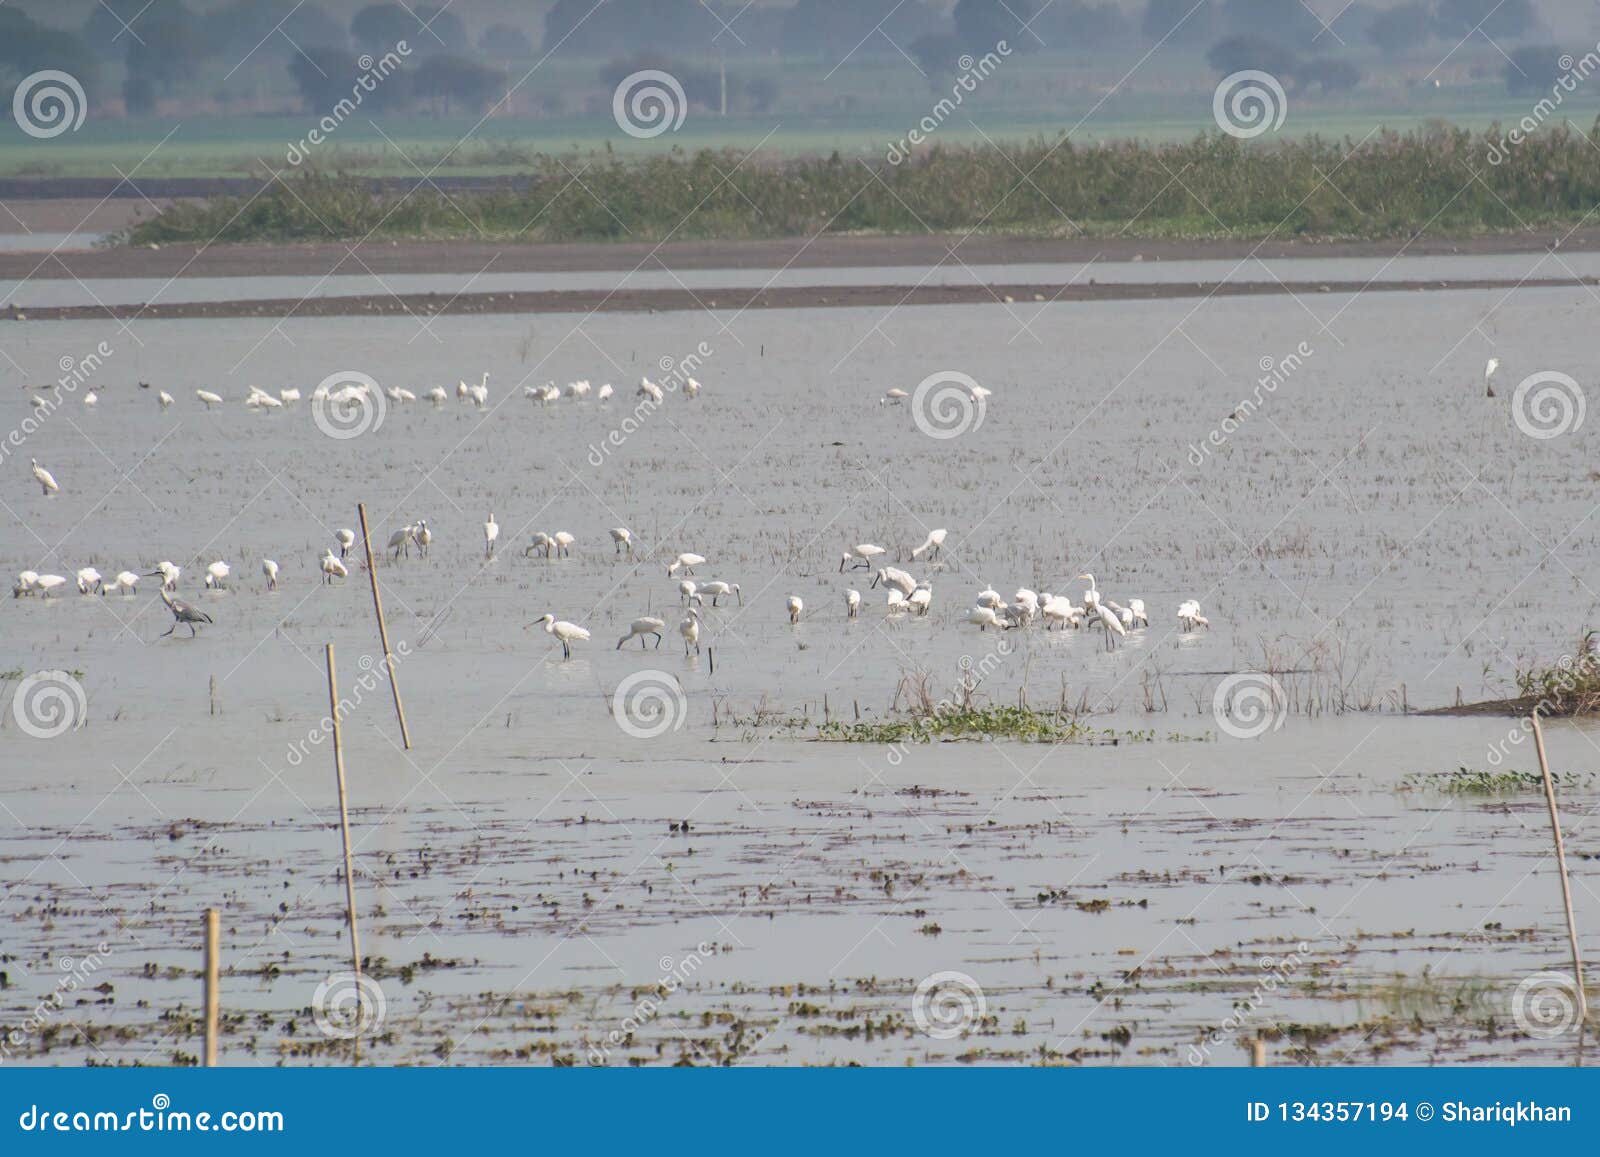 wetland birds and waders in a lake